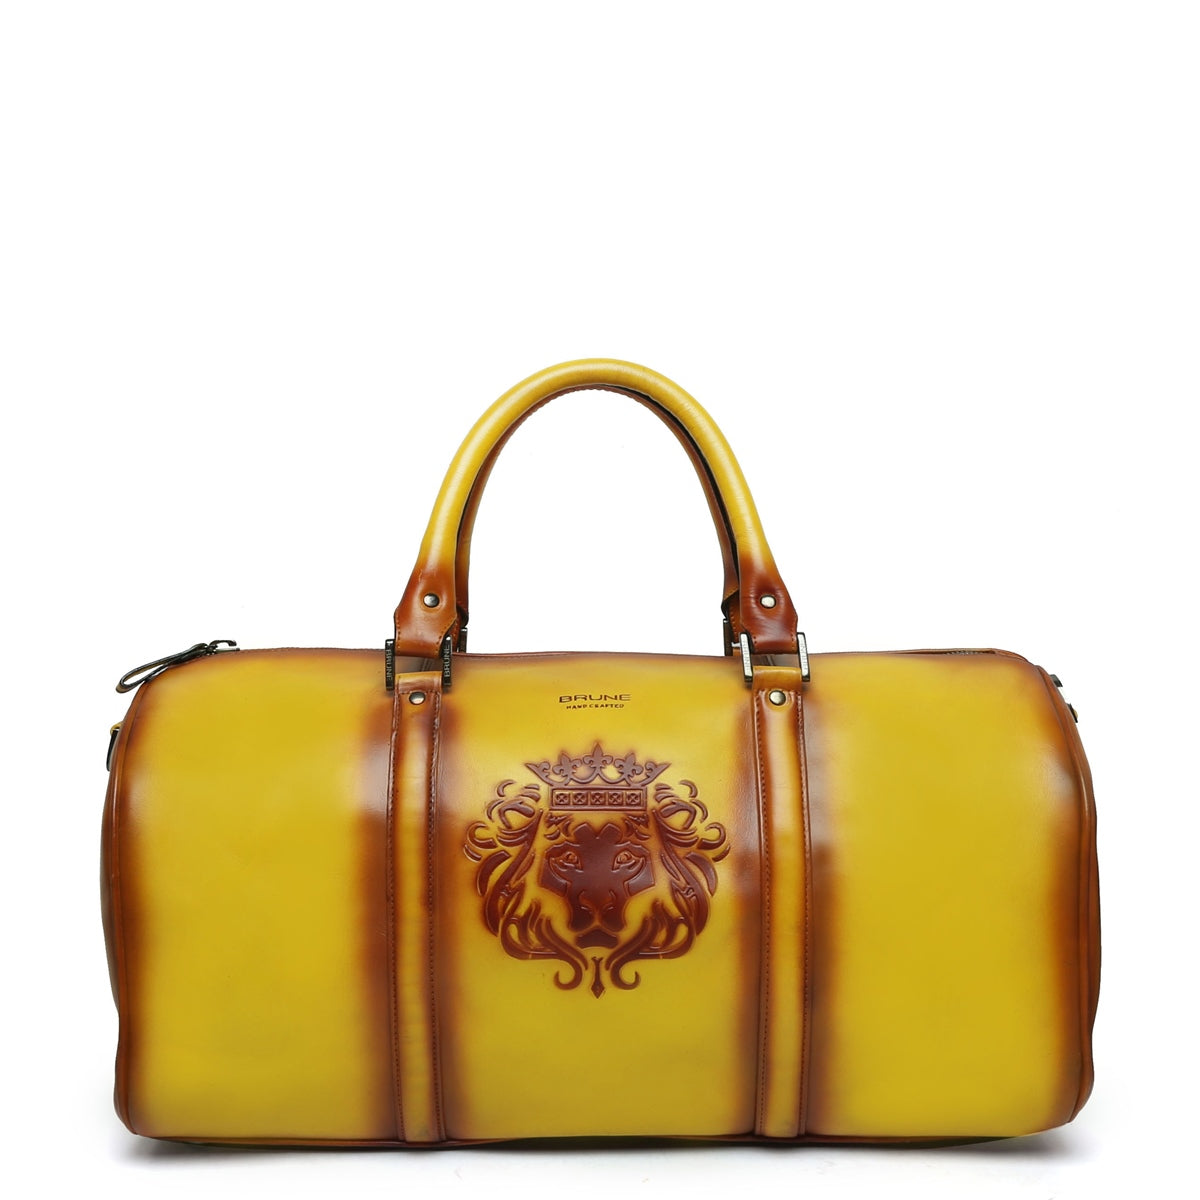 Embossed Lion Yellow Leather Duffle Bag By Brune & Bareskin